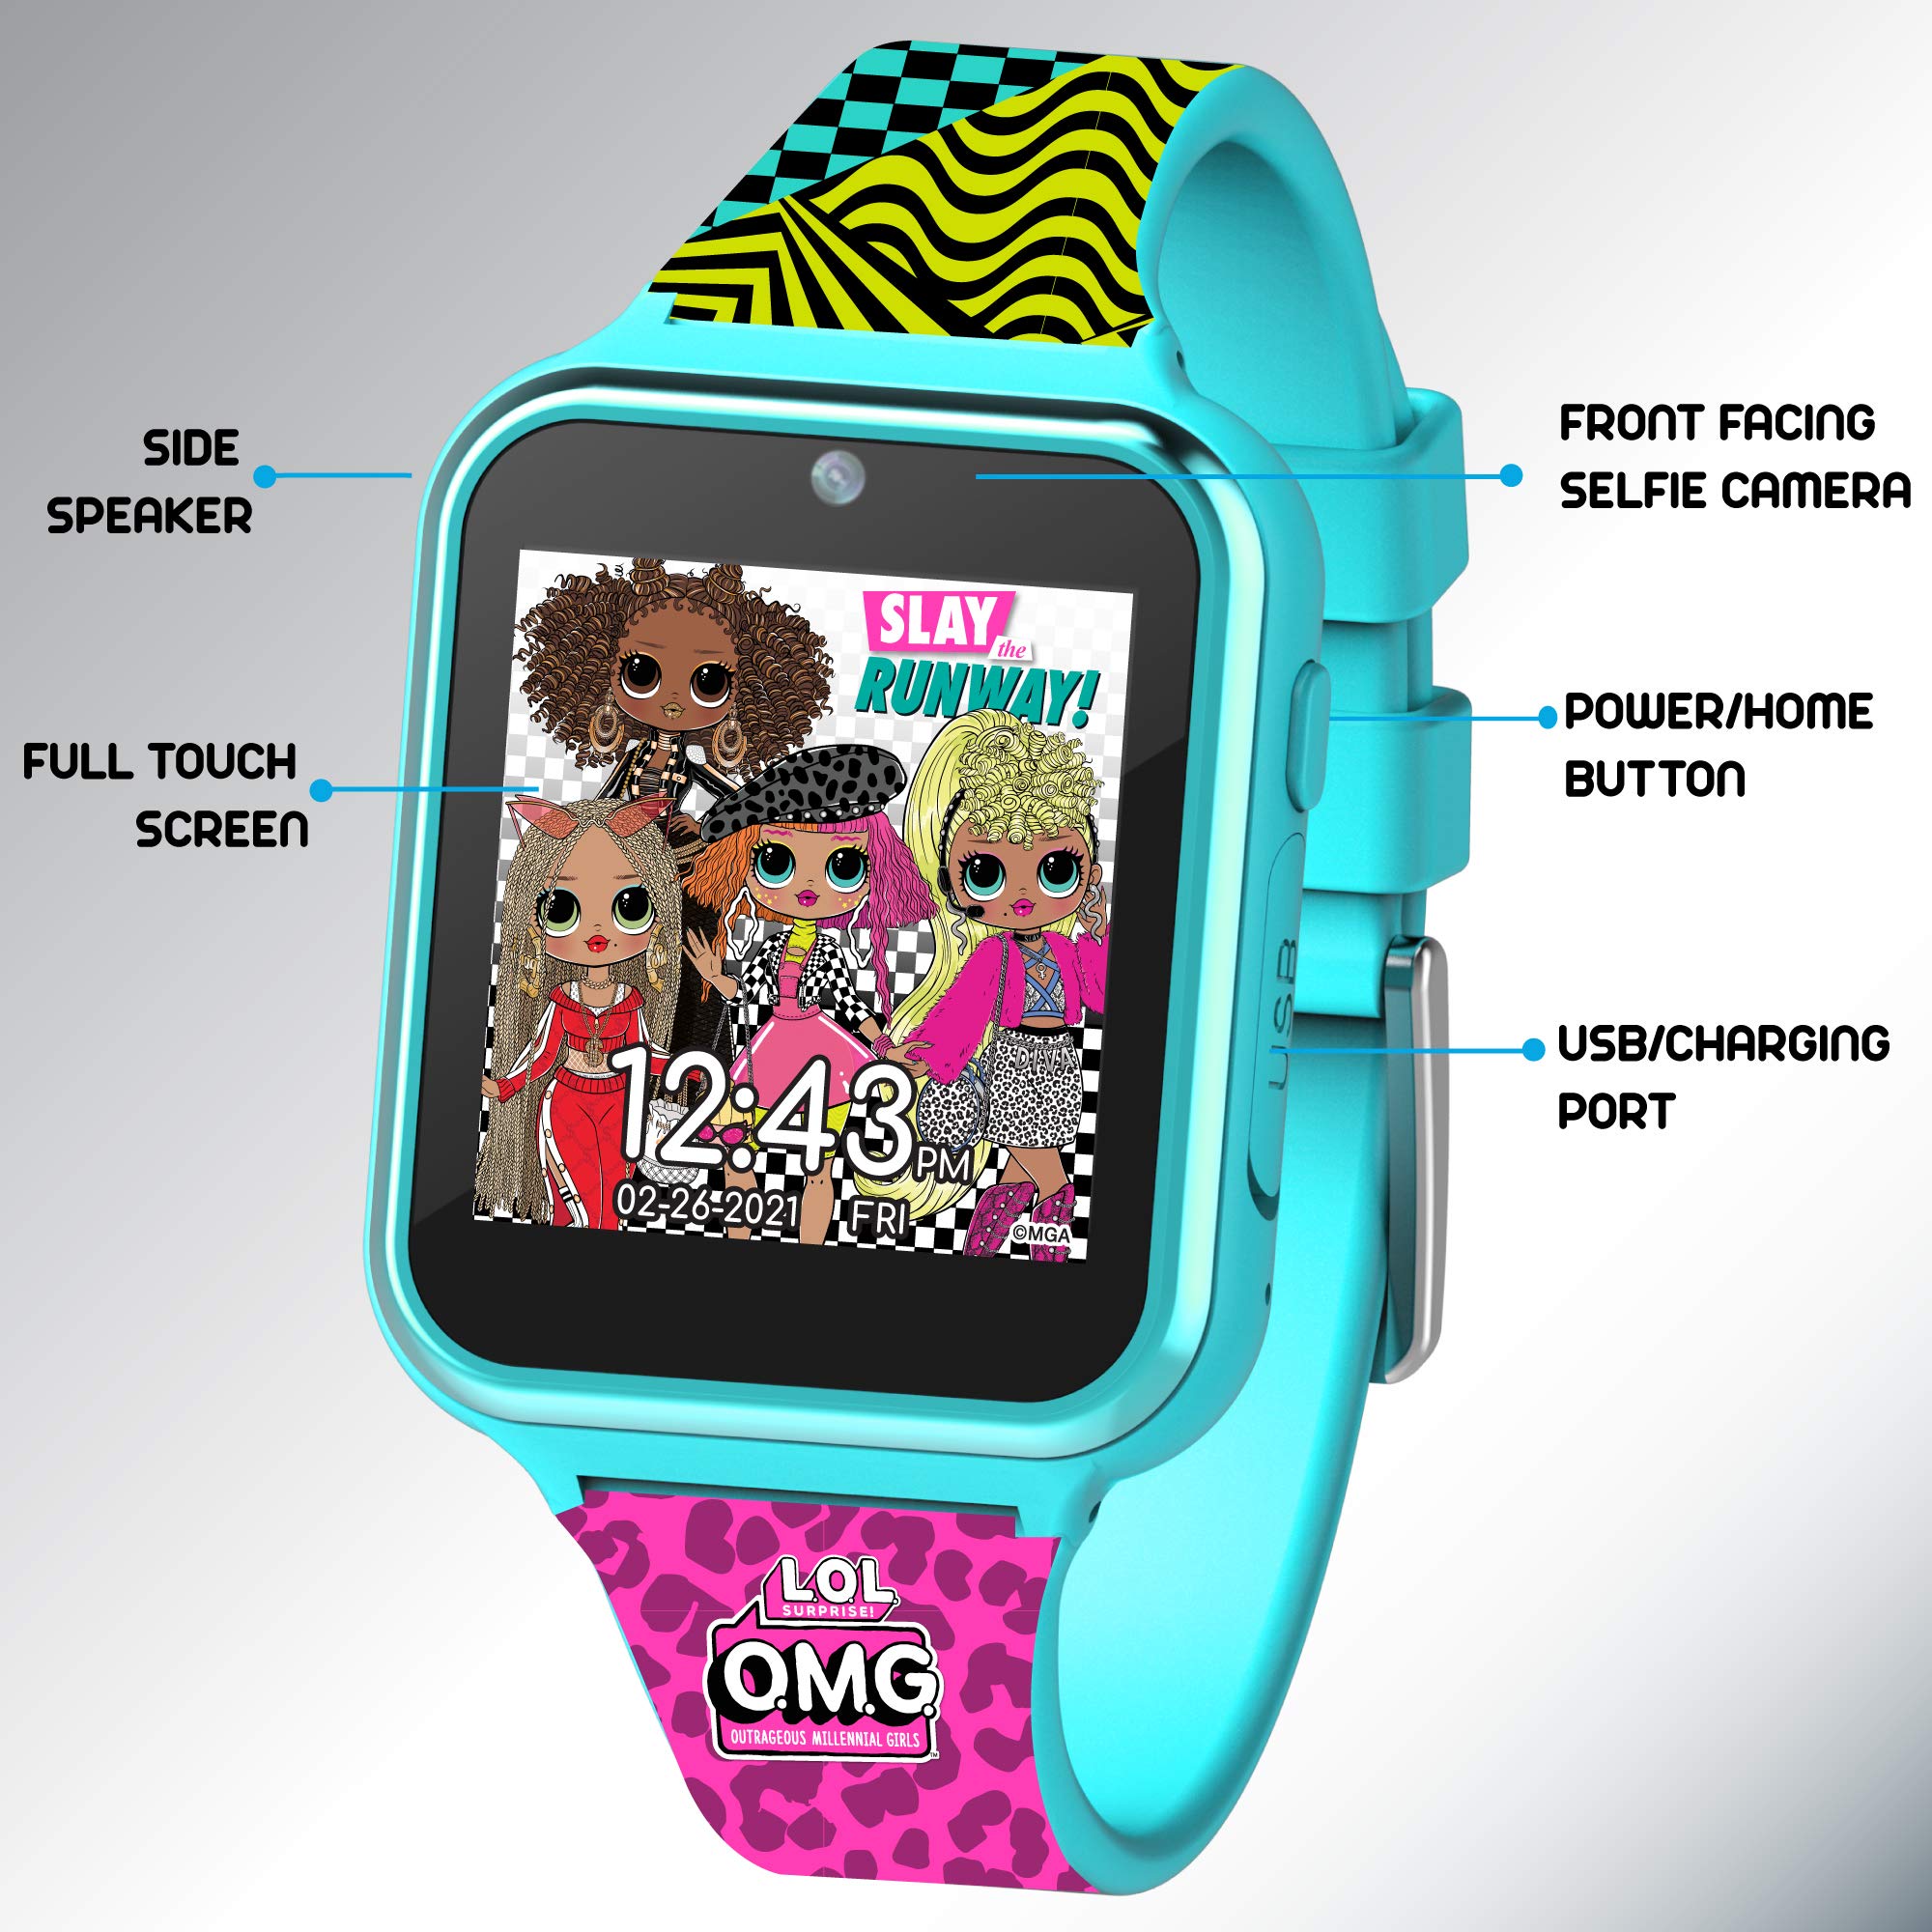 Accutime Kids LOL Surprise Turquoise Educational Learning Touchscreen Smart Watch Toy for Girls, Boys, Toddlers - Selfie Cam, Learning Games, Alarm, Calculator, Pedometer & More (Model: LOL4320OMGAZ)